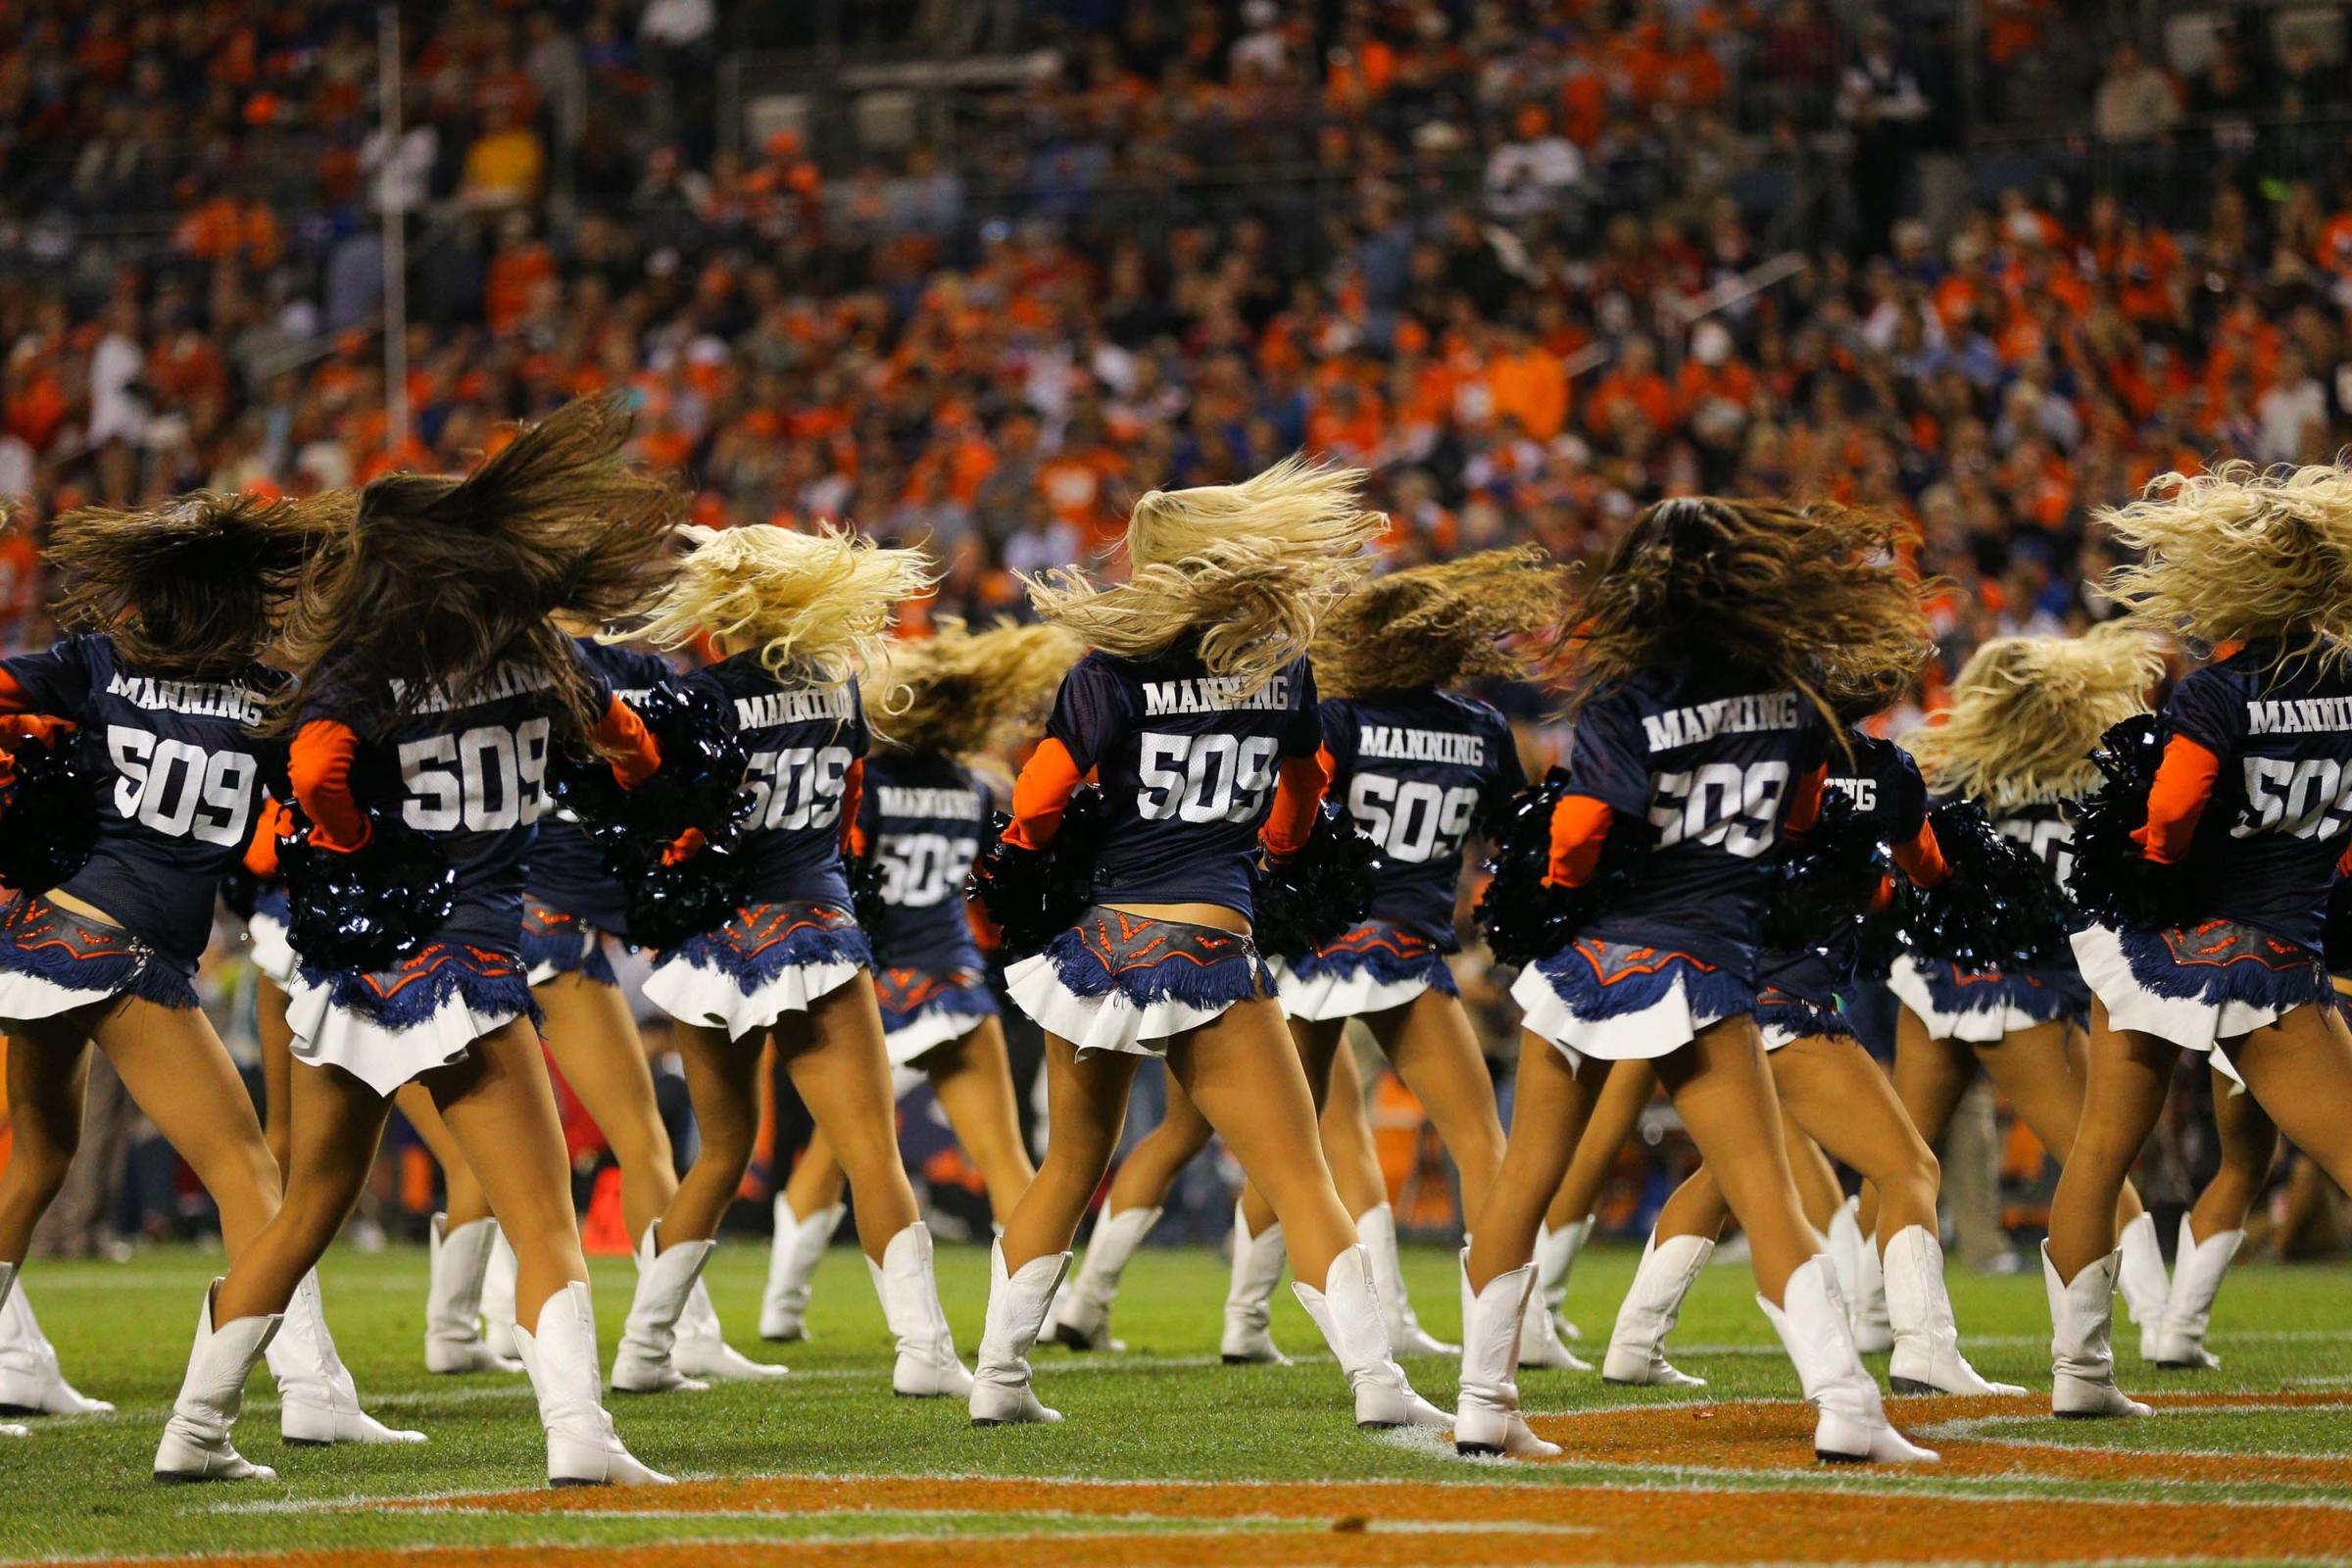 Denver Broncos cheerleaders perform wearing "509" jerseys celebrating quarterback Peyton Manning's record setting 509th career touchdown pass during a game between the Denver Broncos and the San Francisco 49ers at Sports Authority Field at Mile High on Oct. 19, 2014 in Denver.